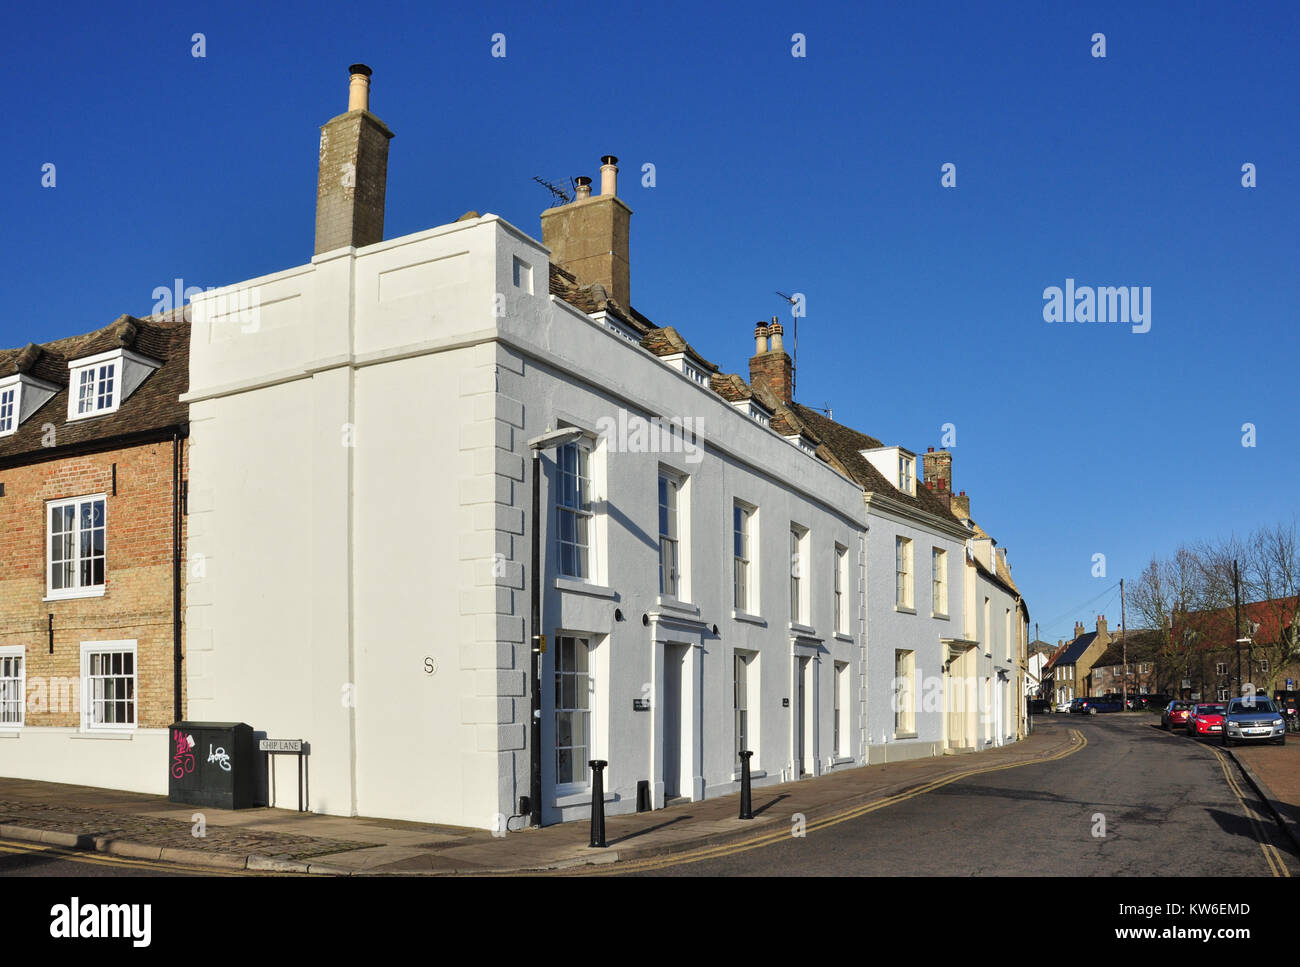 Houses facing the river, Waterside, Ely, Cambridgeshire, England, UK Stock Photo